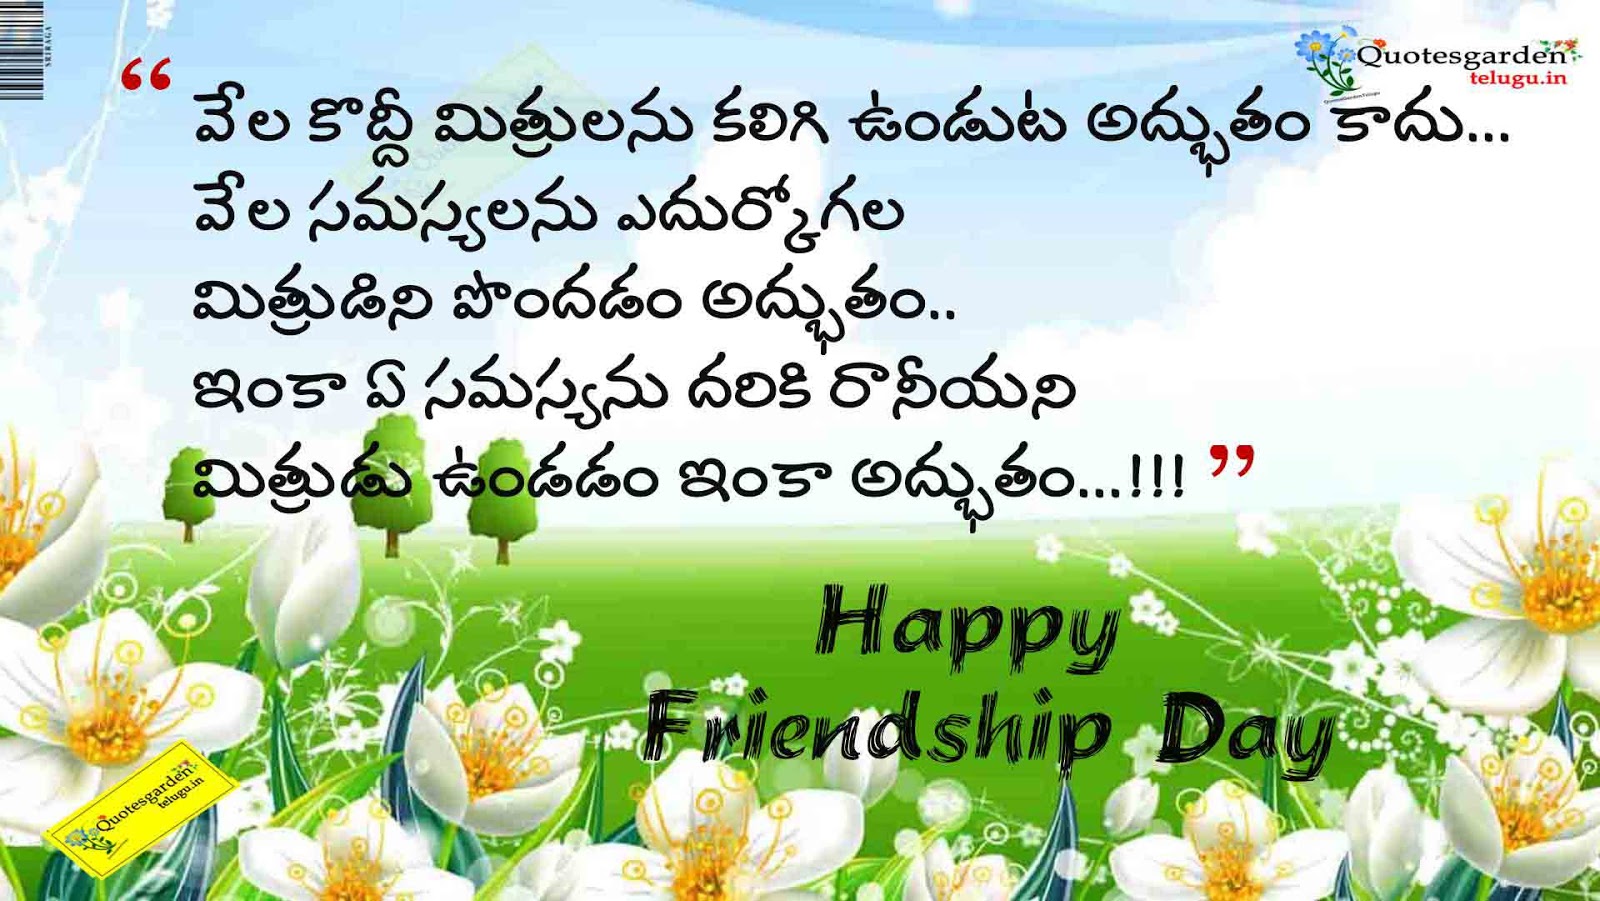 Friendship day Quotes in telugu with HD wallpapers 769 | QUOTES ...